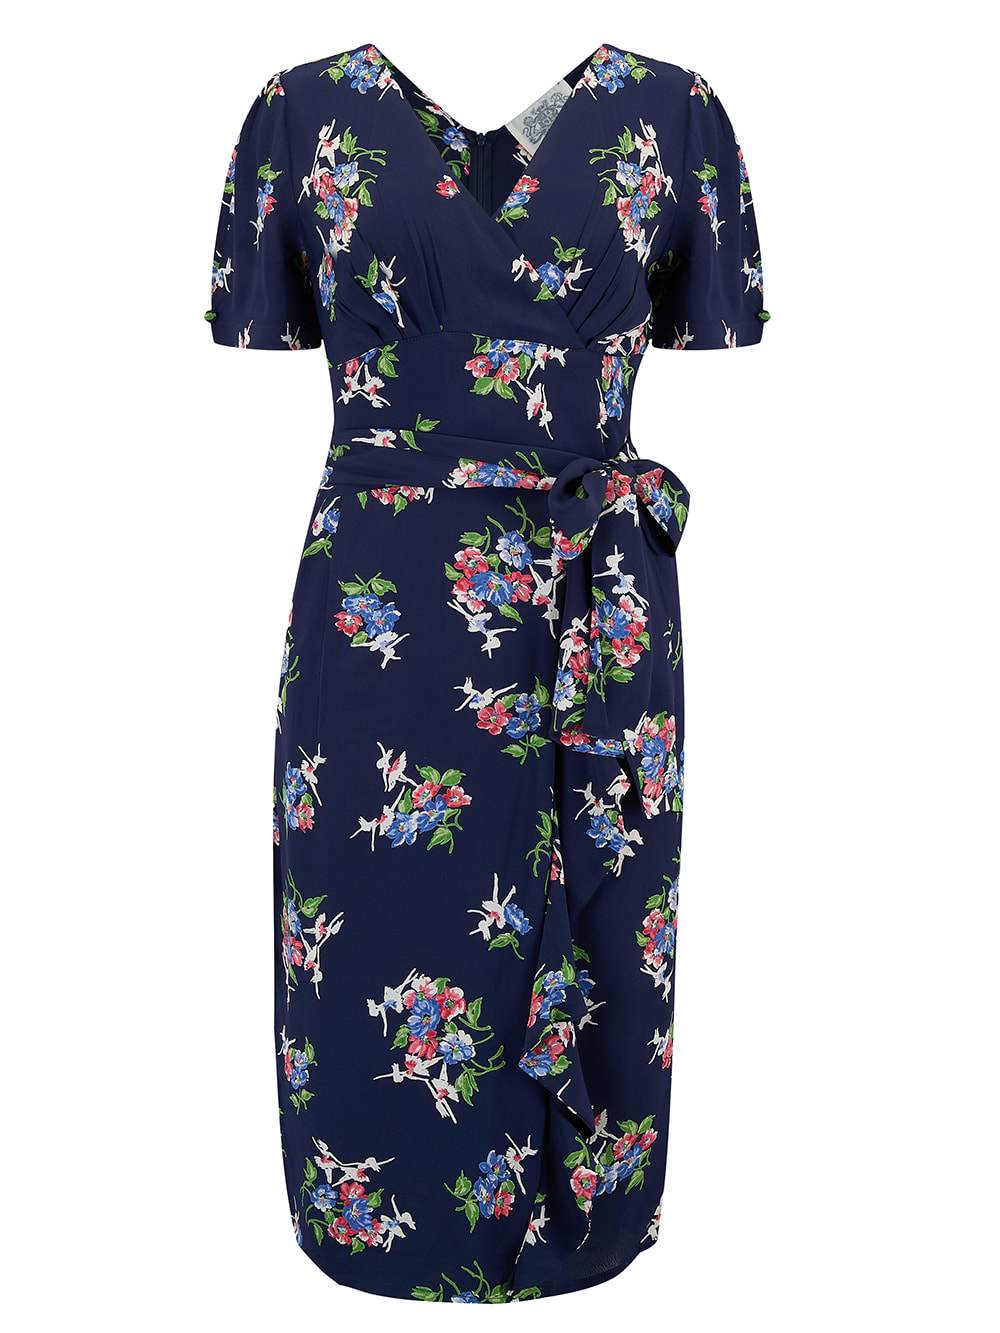 "Lilian" Dress in Navy Floral Dancer, Classic & Authentic 1940s Vintage Style - True and authentic vintage style clothing, inspired by the Classic styles of CC41 , WW2 and the fun 1950s RocknRoll era, for everyday wear plus events like Goodwood Revival, Twinwood Festival and Viva Las Vegas Rockabilly Weekend Rock n Romance The Seamstress Of Bloomsbury